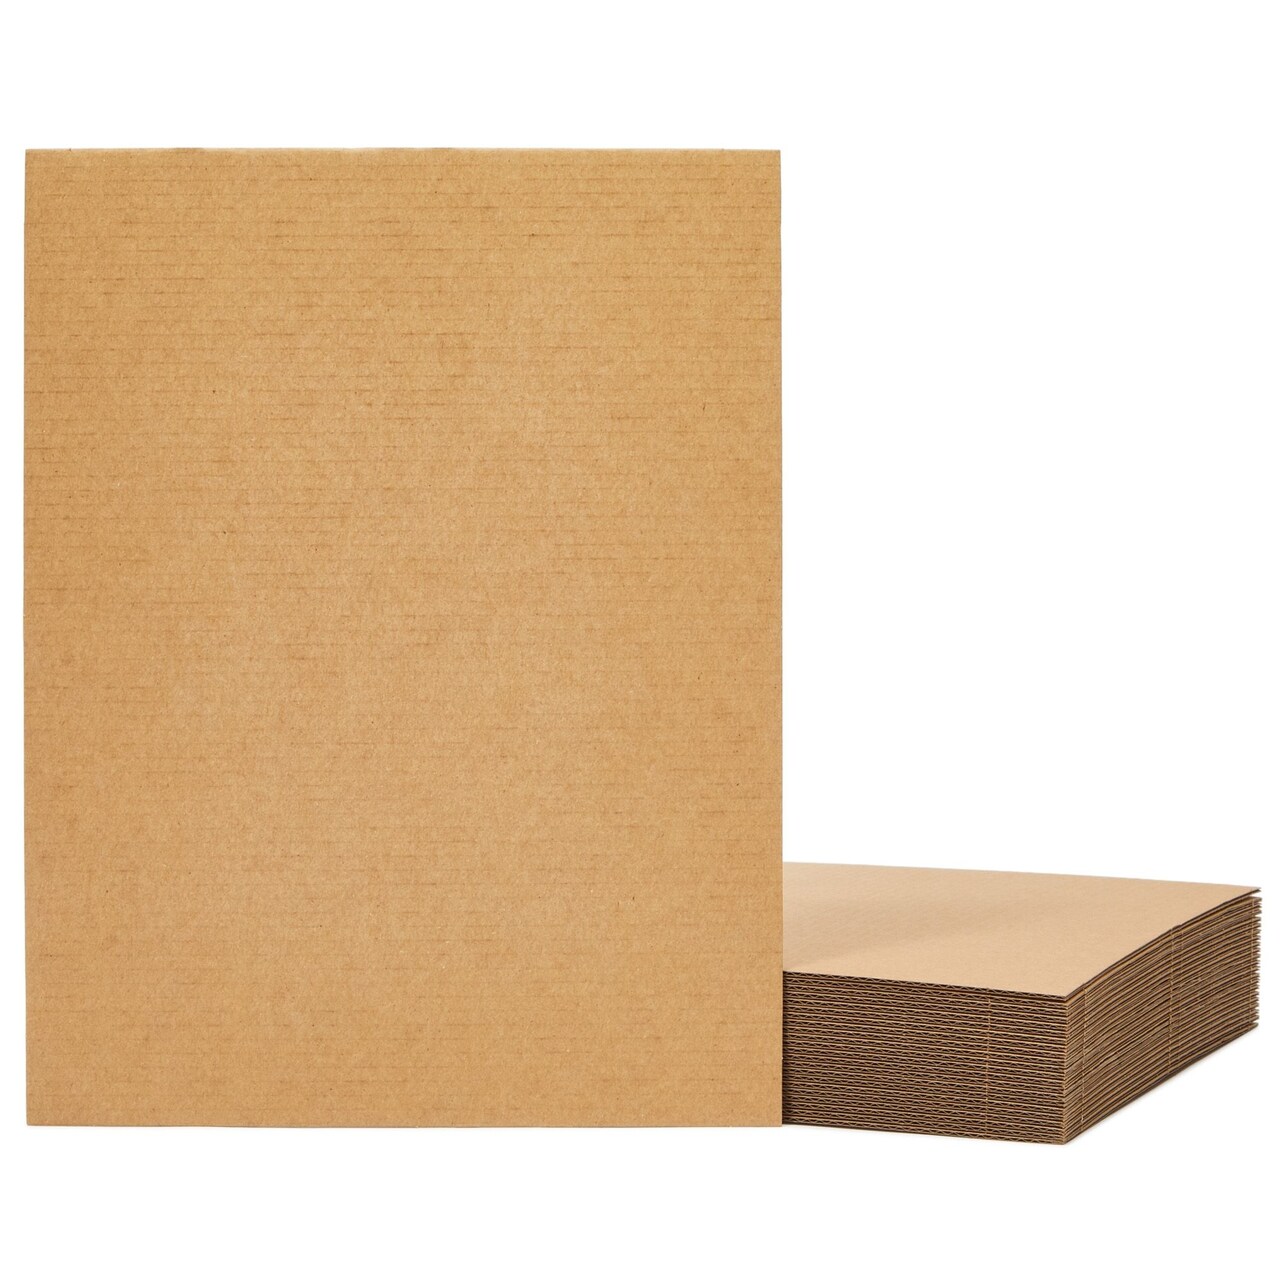 24 Sheets Kraft Corrugated Cardboard Sheets, Inserts for Mailers, Dividers,  Packing, Crafts (Brown, 8.5 x 11 In)